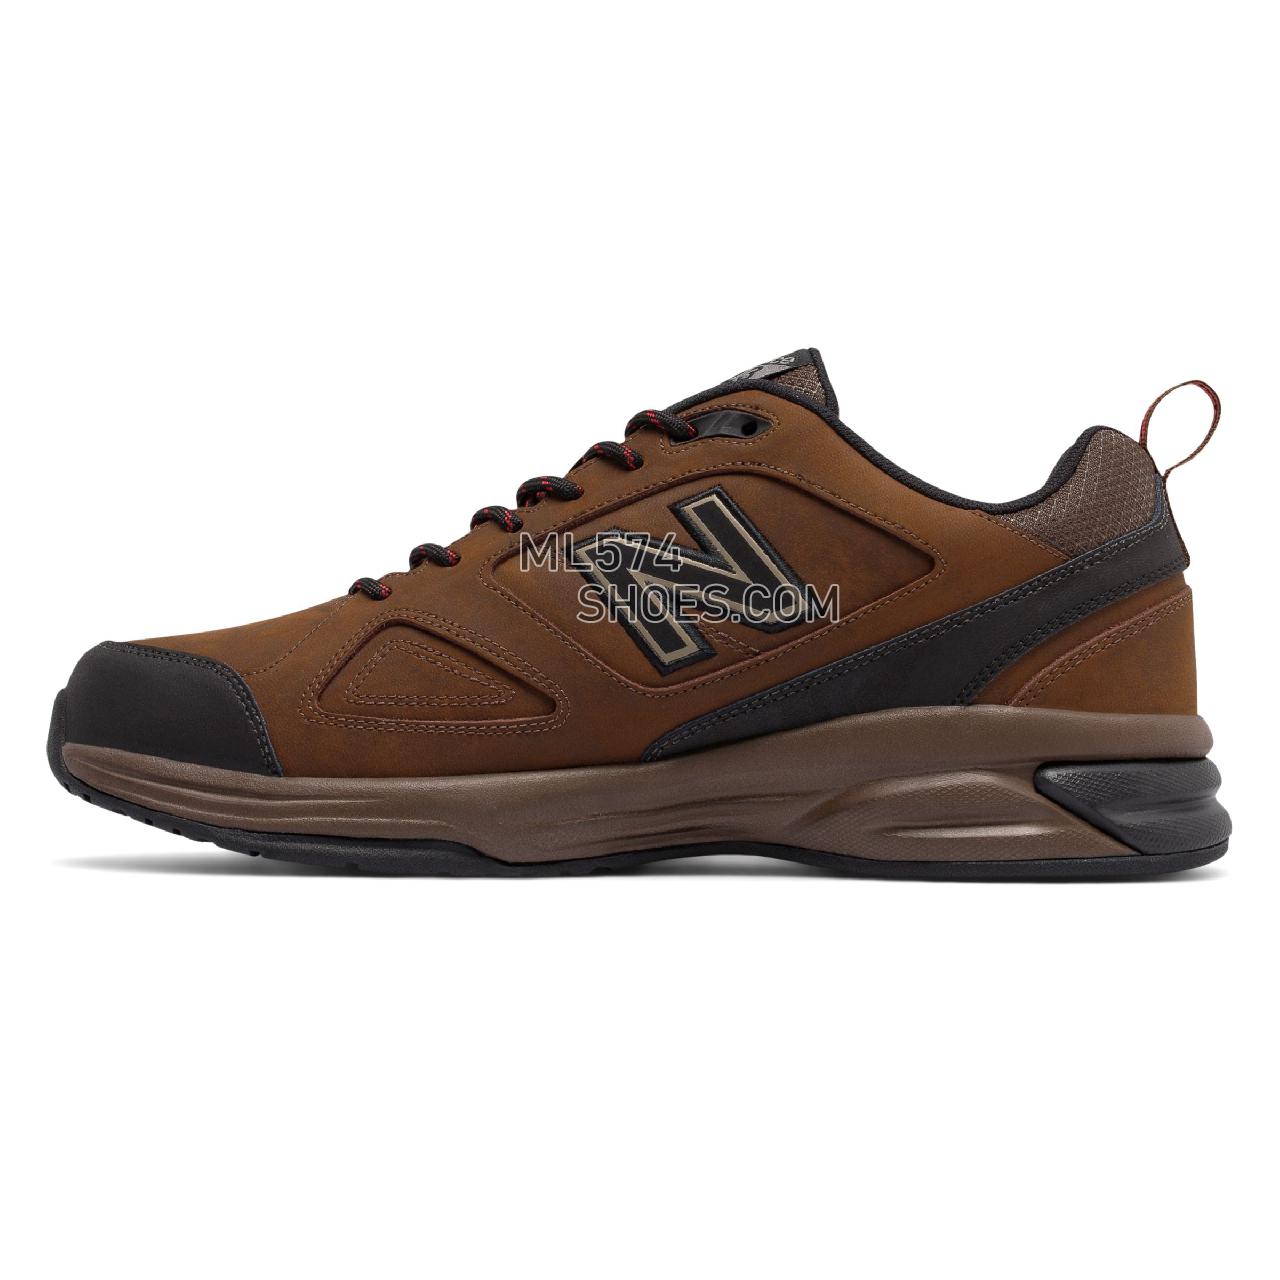 New Balance New Balance 623v3 Trainer Leather - Men's 623 - X-training Brown with Brown - MX623LT3